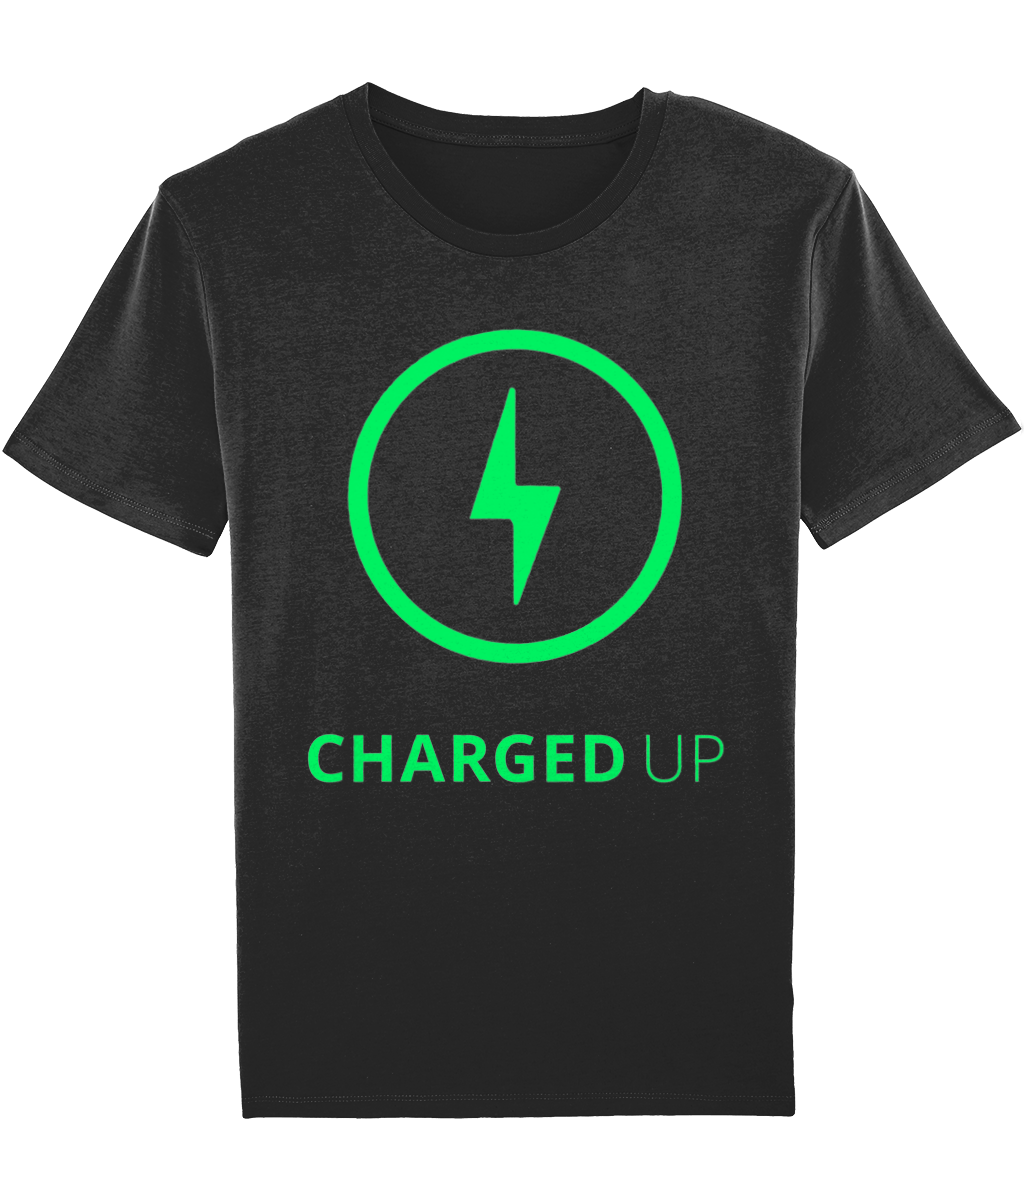 CHARGED UP MEN'S T-SHIRT